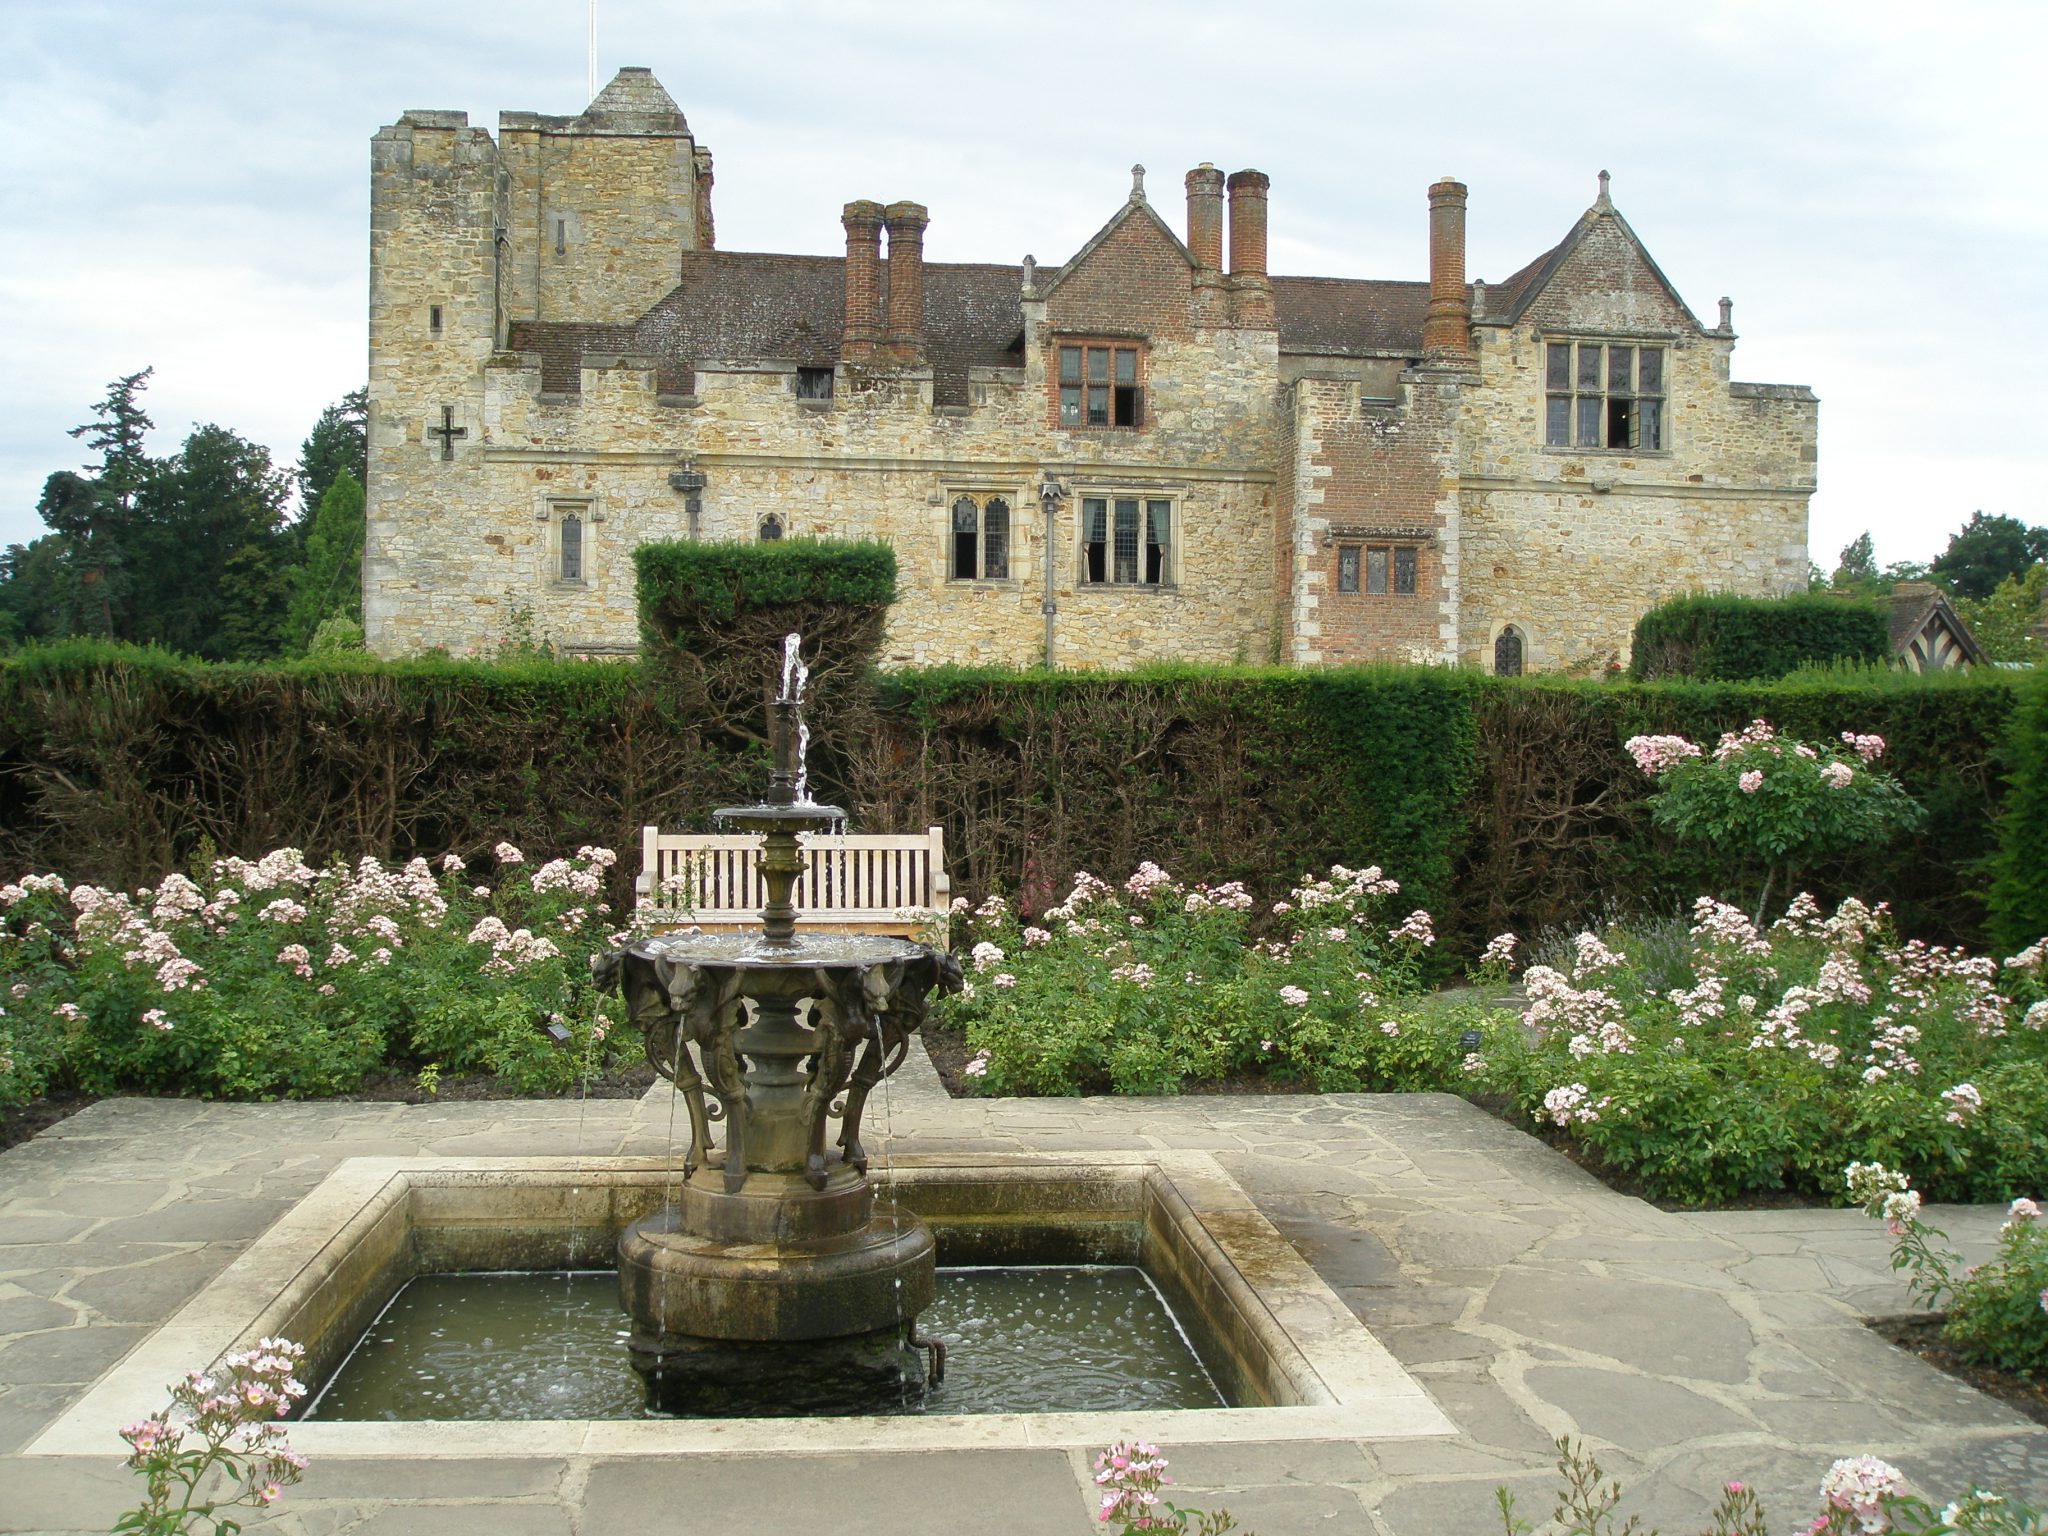 View of Hever Castle, from the Tudor Garden